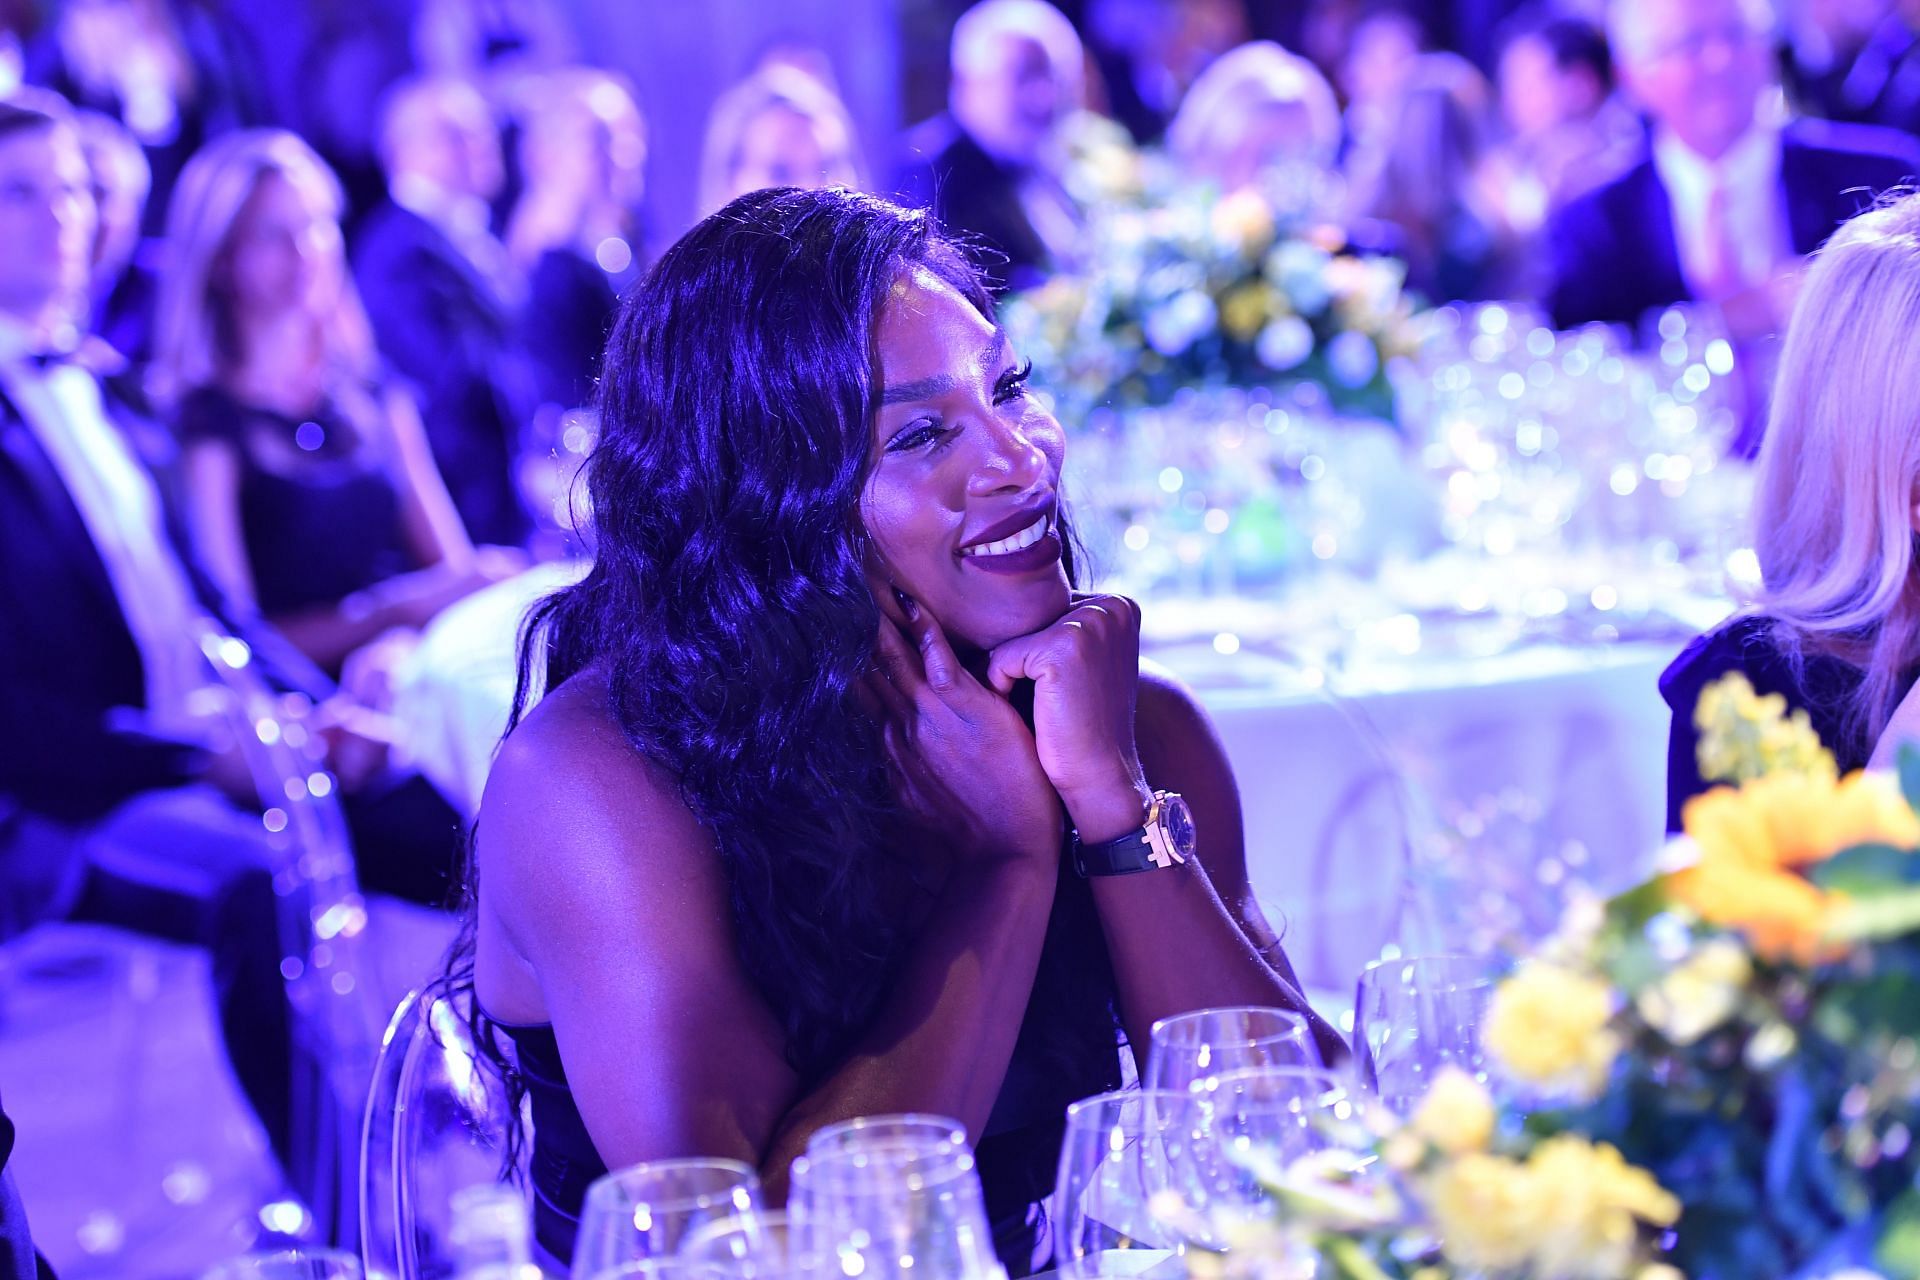 Williams at the Tennis Meets Fashion At The Milano Gala Dinner